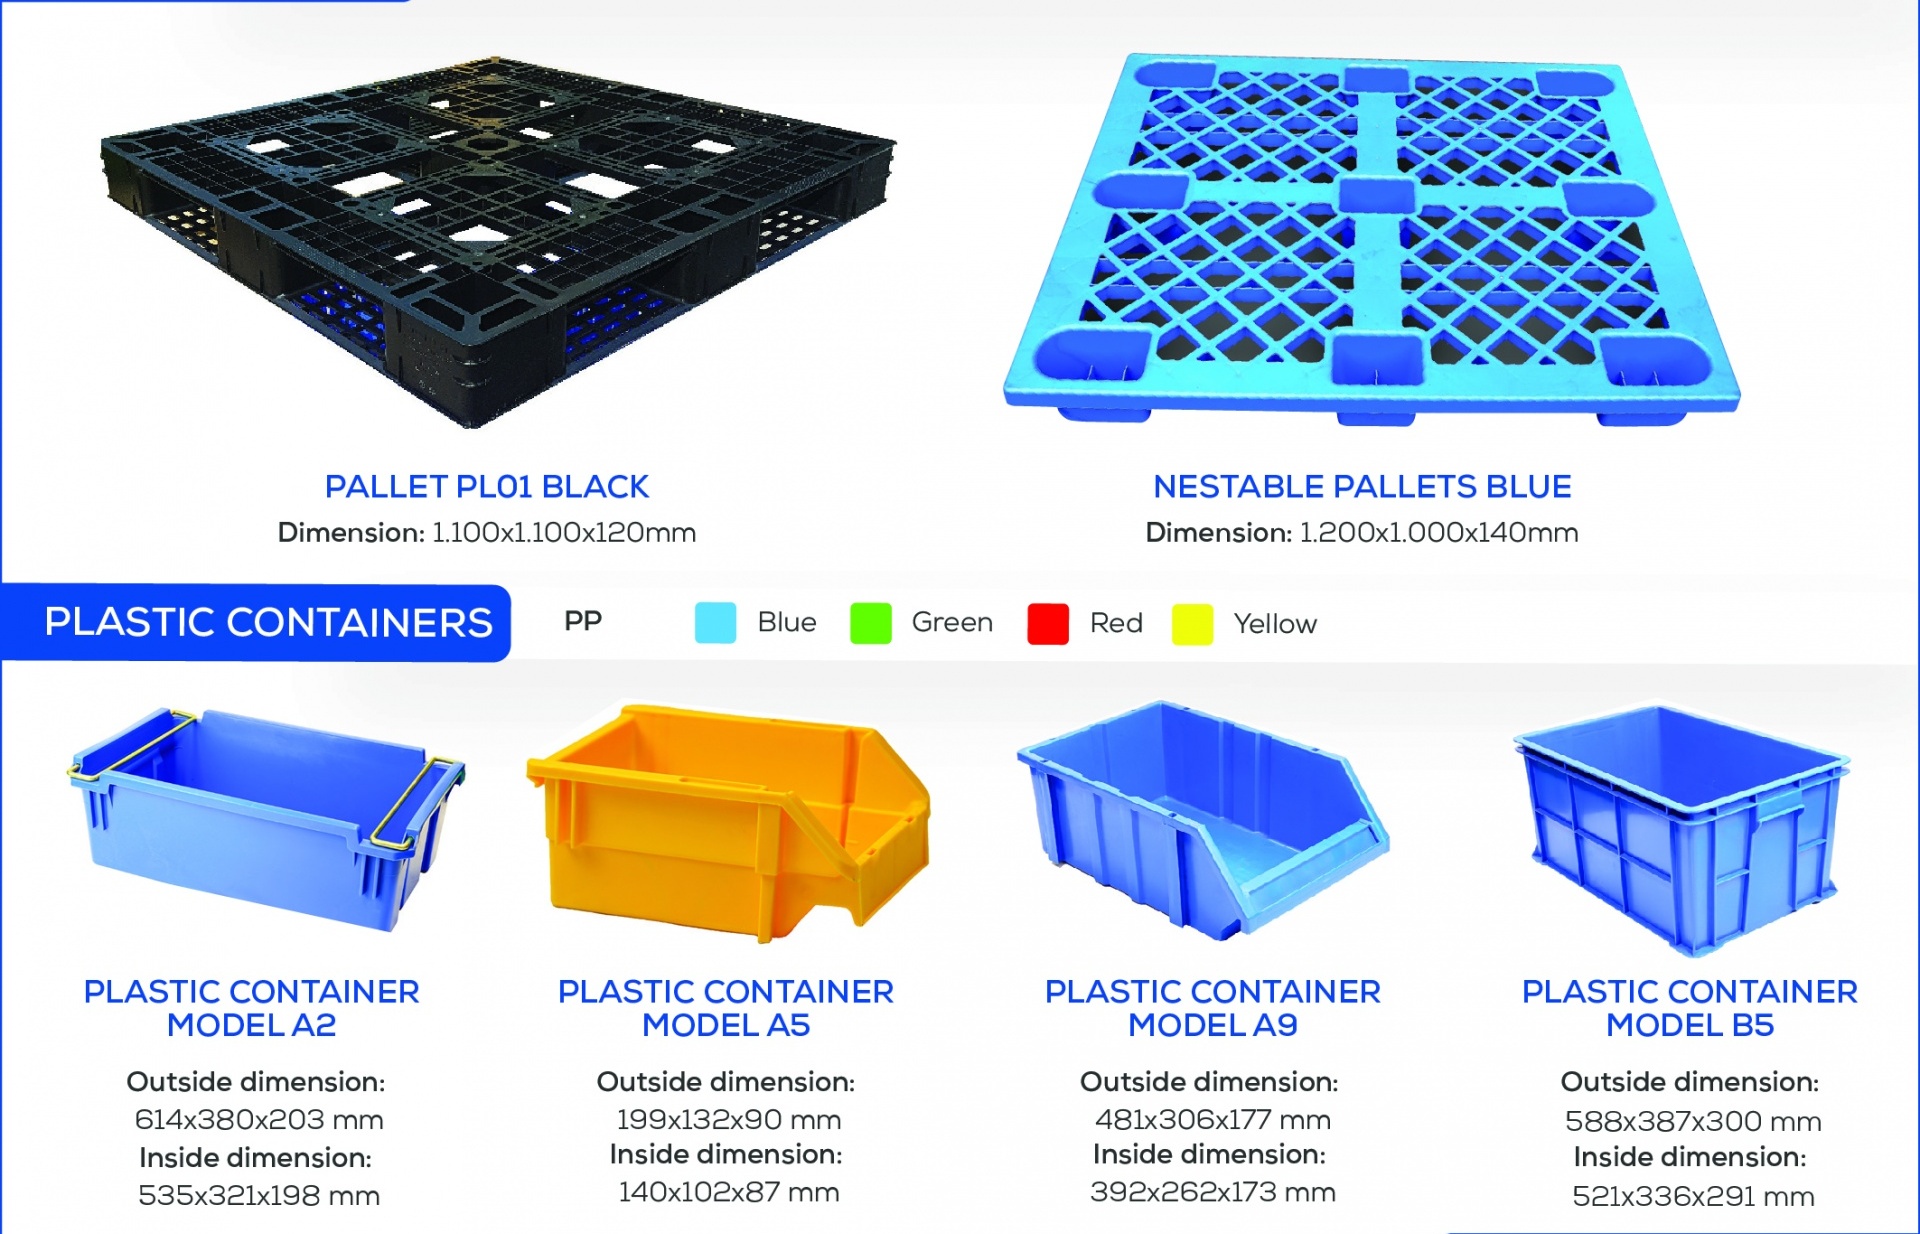 HPC’s plastic containers and pallets: 30 years of proud development